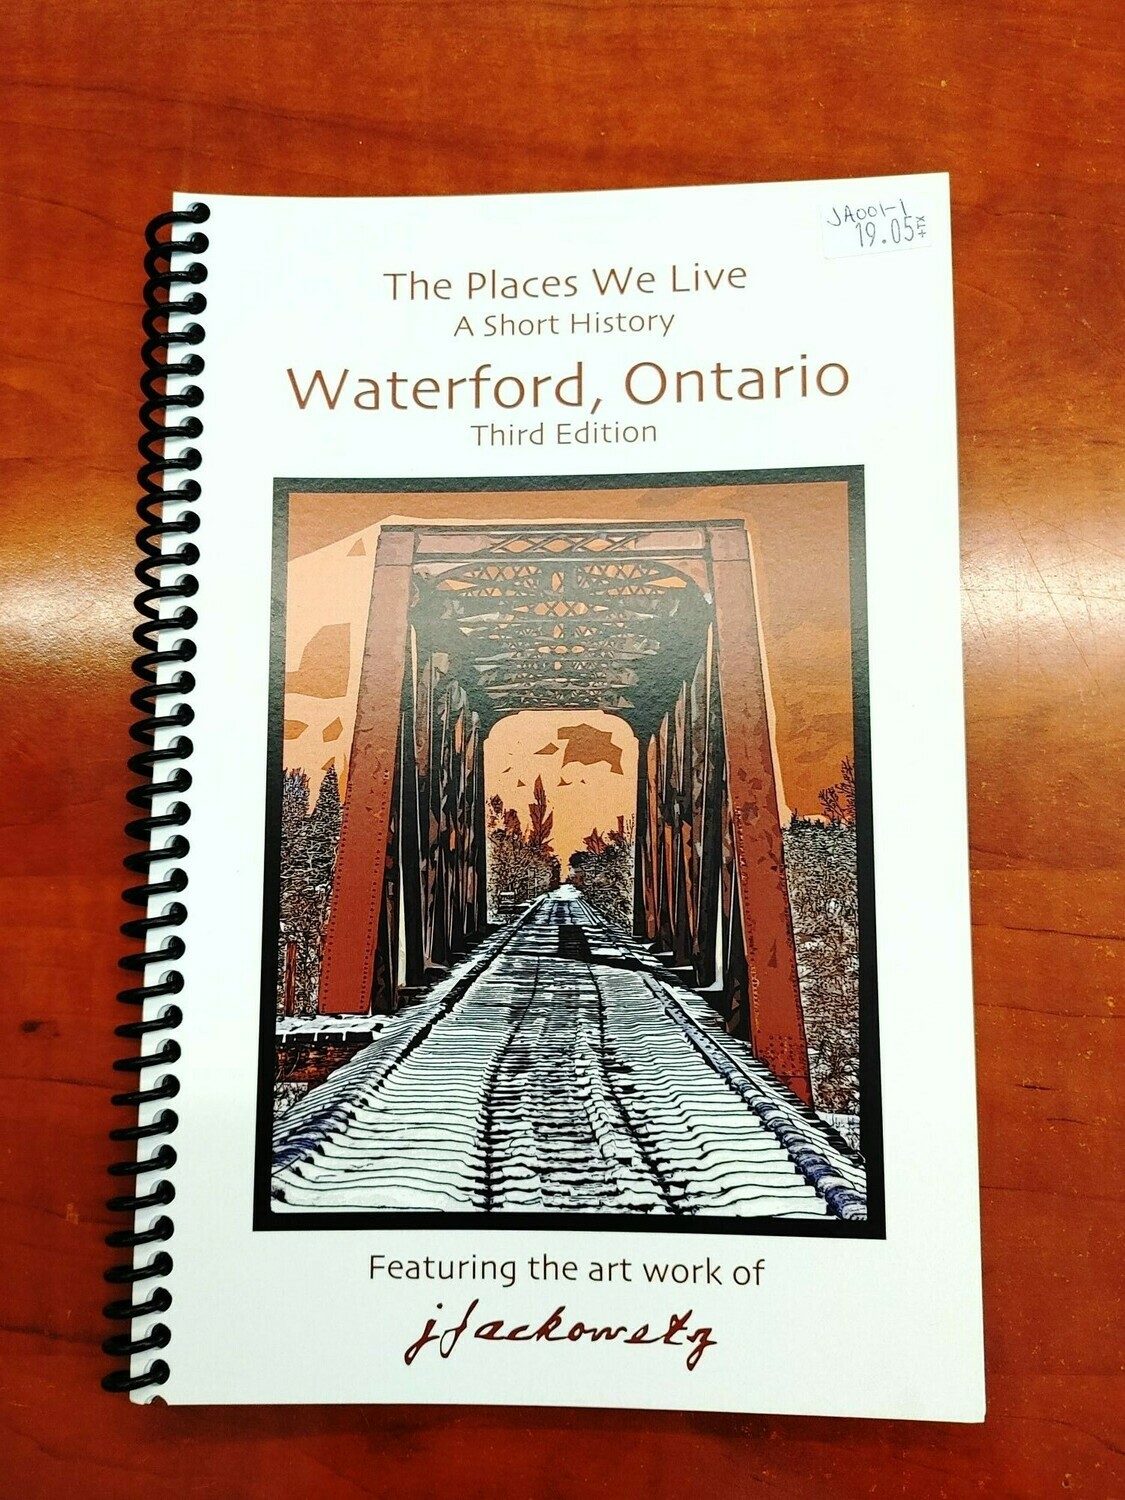 The Places We Live - Waterford by Jack Jackowetz